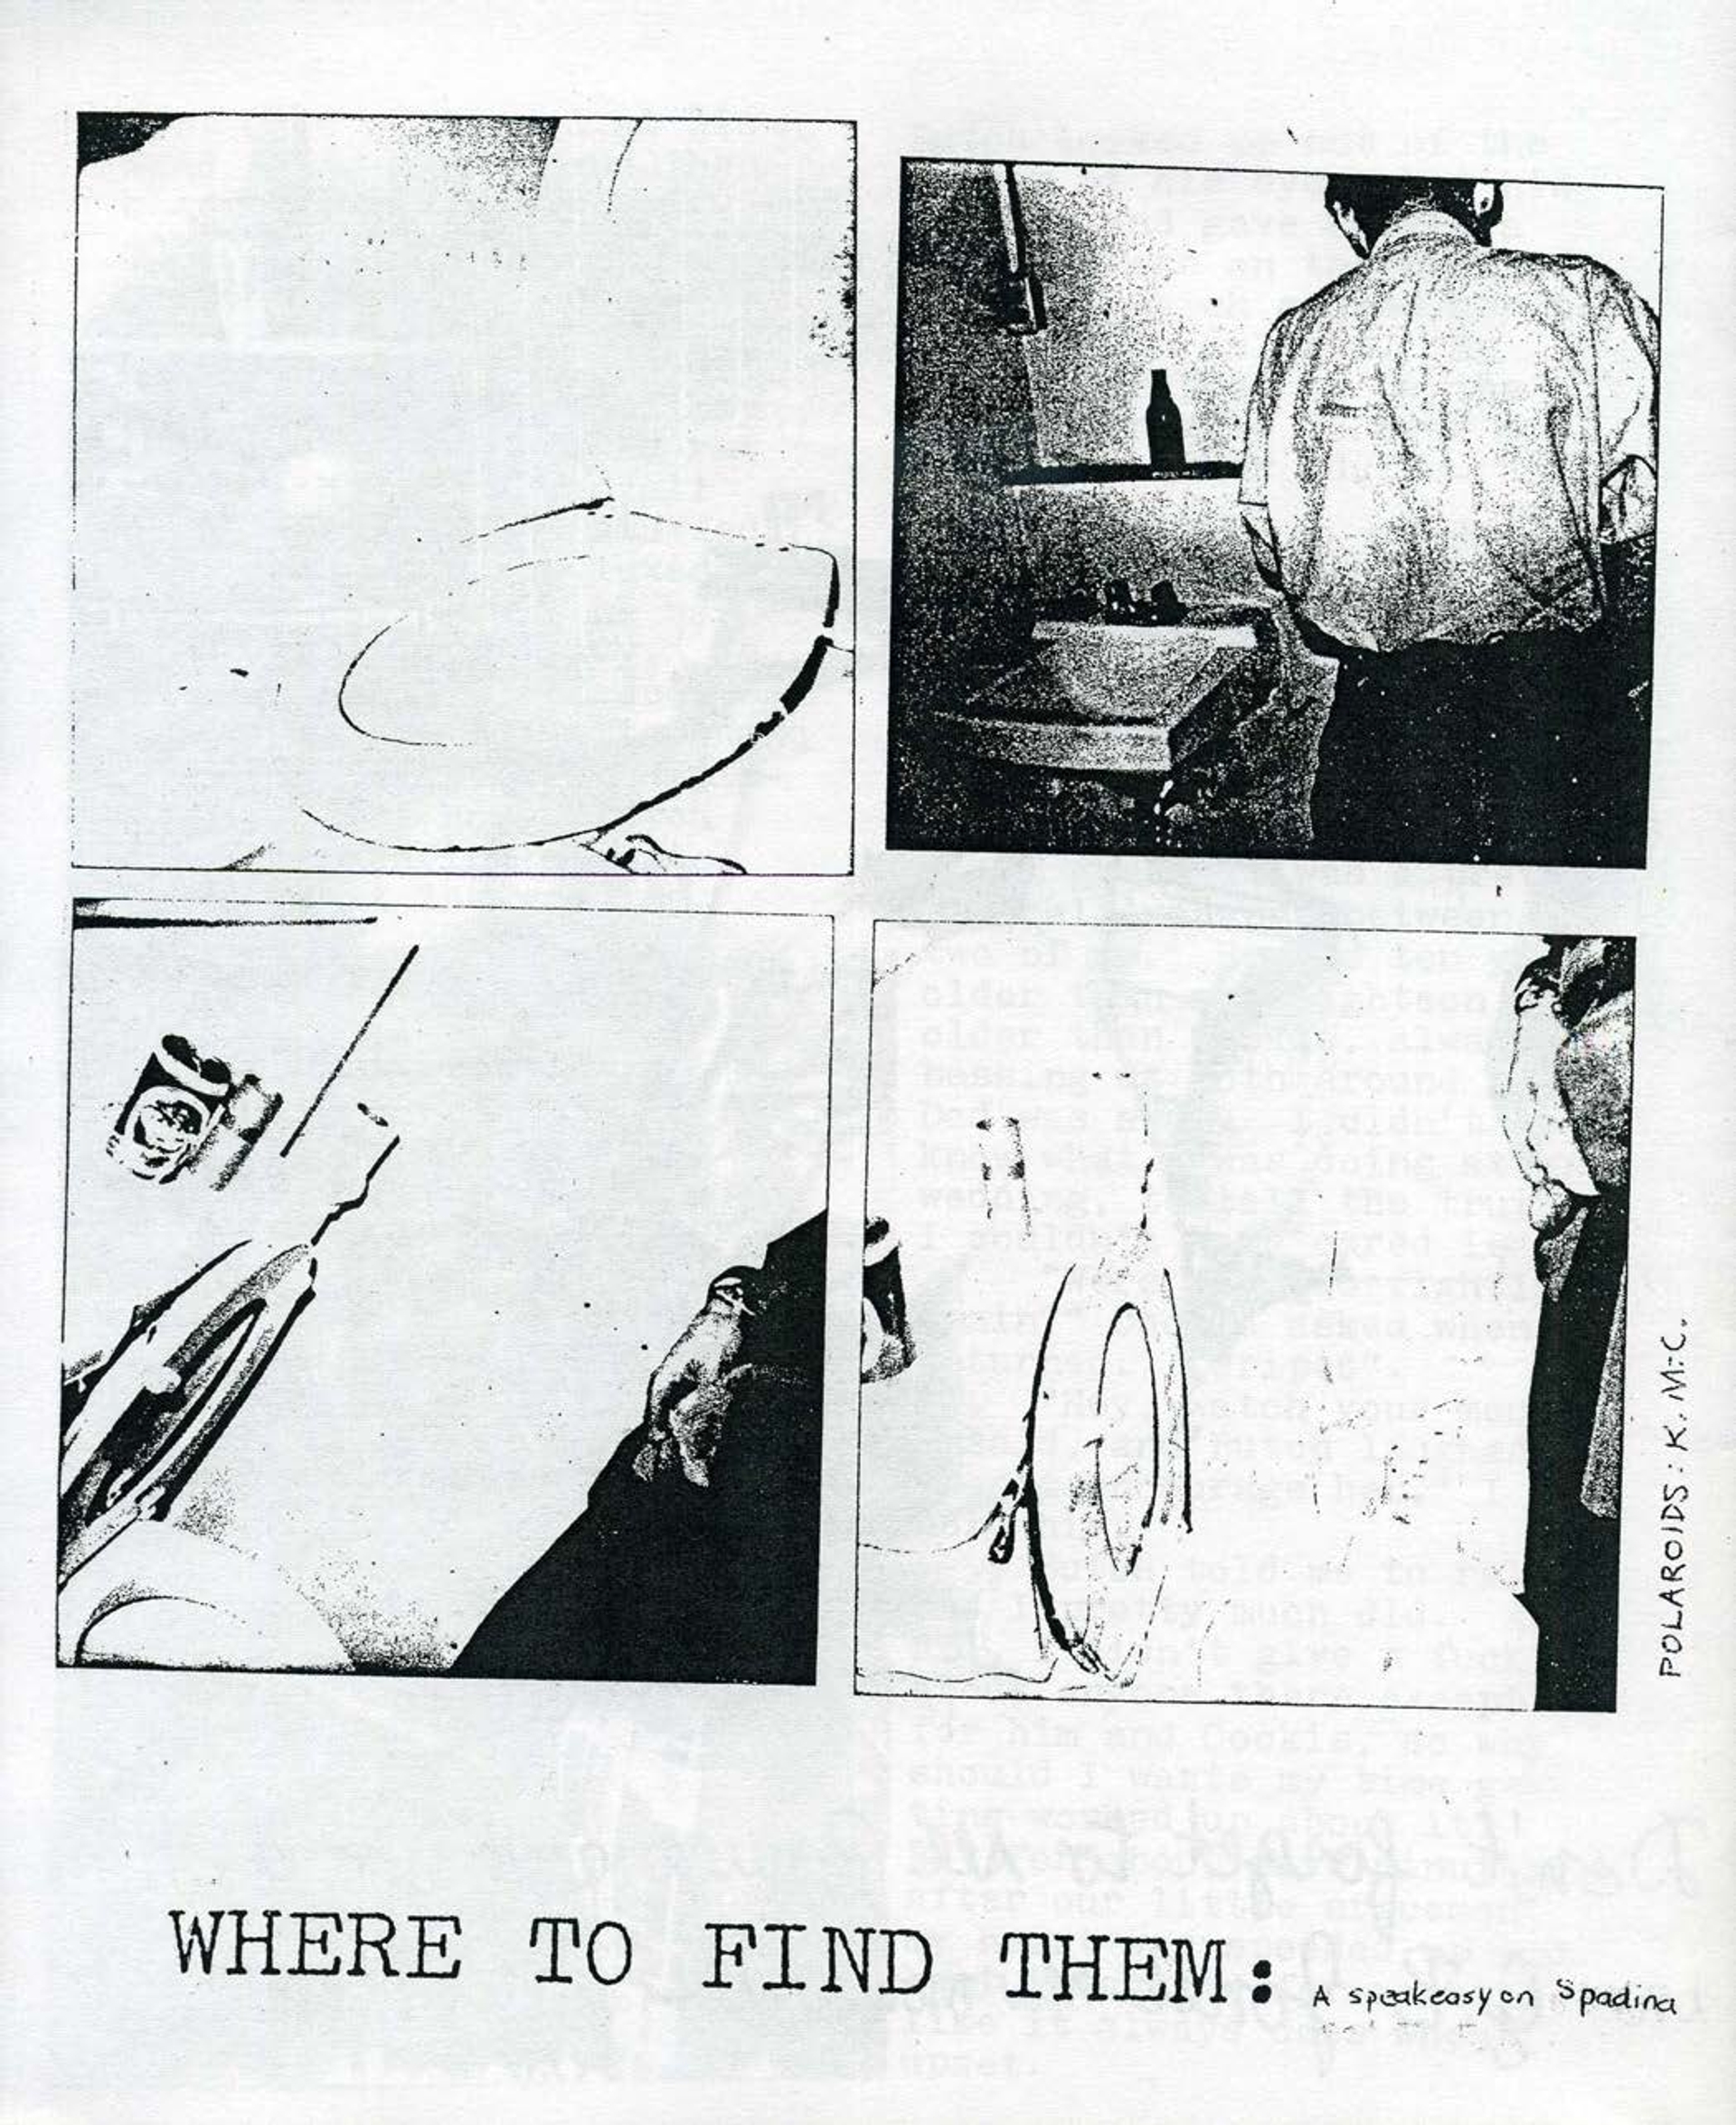 Selected excerpts from J.D.s issues 1-8, 1985-1991 — Courtesy of the artists.